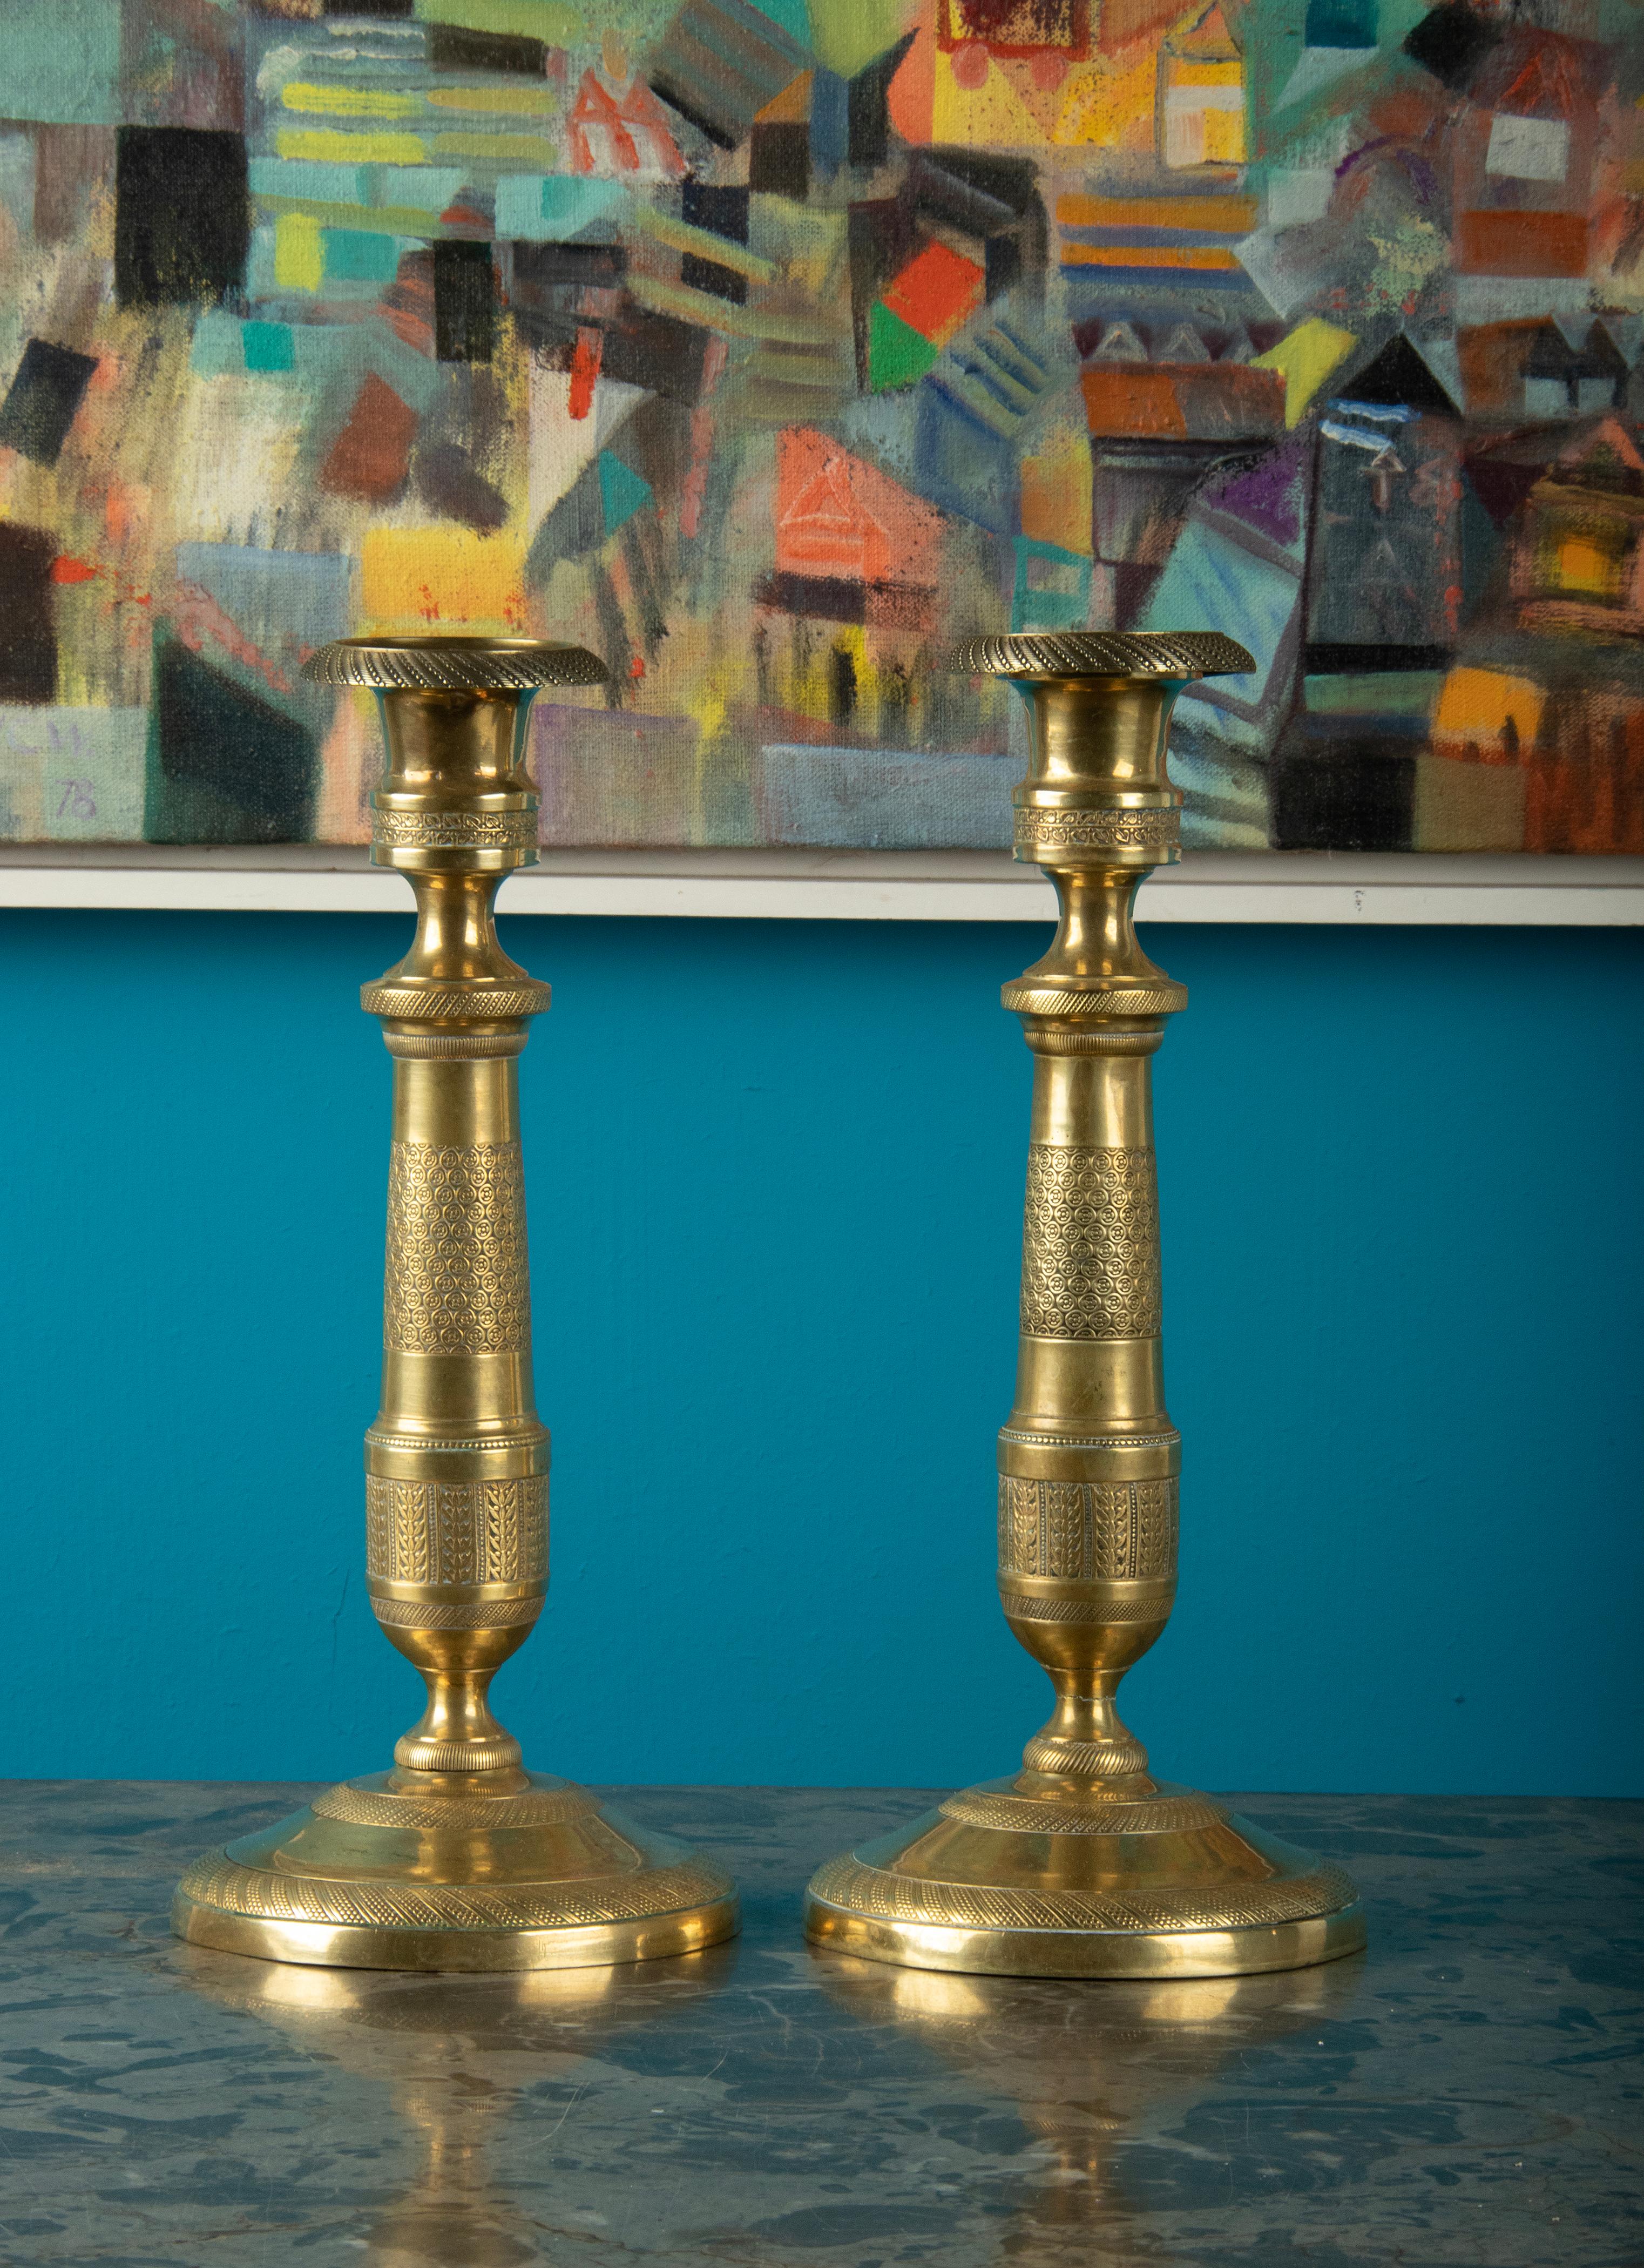 A pair of brass candlesticks. Beautifully decorated with refined silicery in Louis XVI style. The candlesticks date from around 1880-1890, originating from France. Small dents in feet, not perfectly round. 